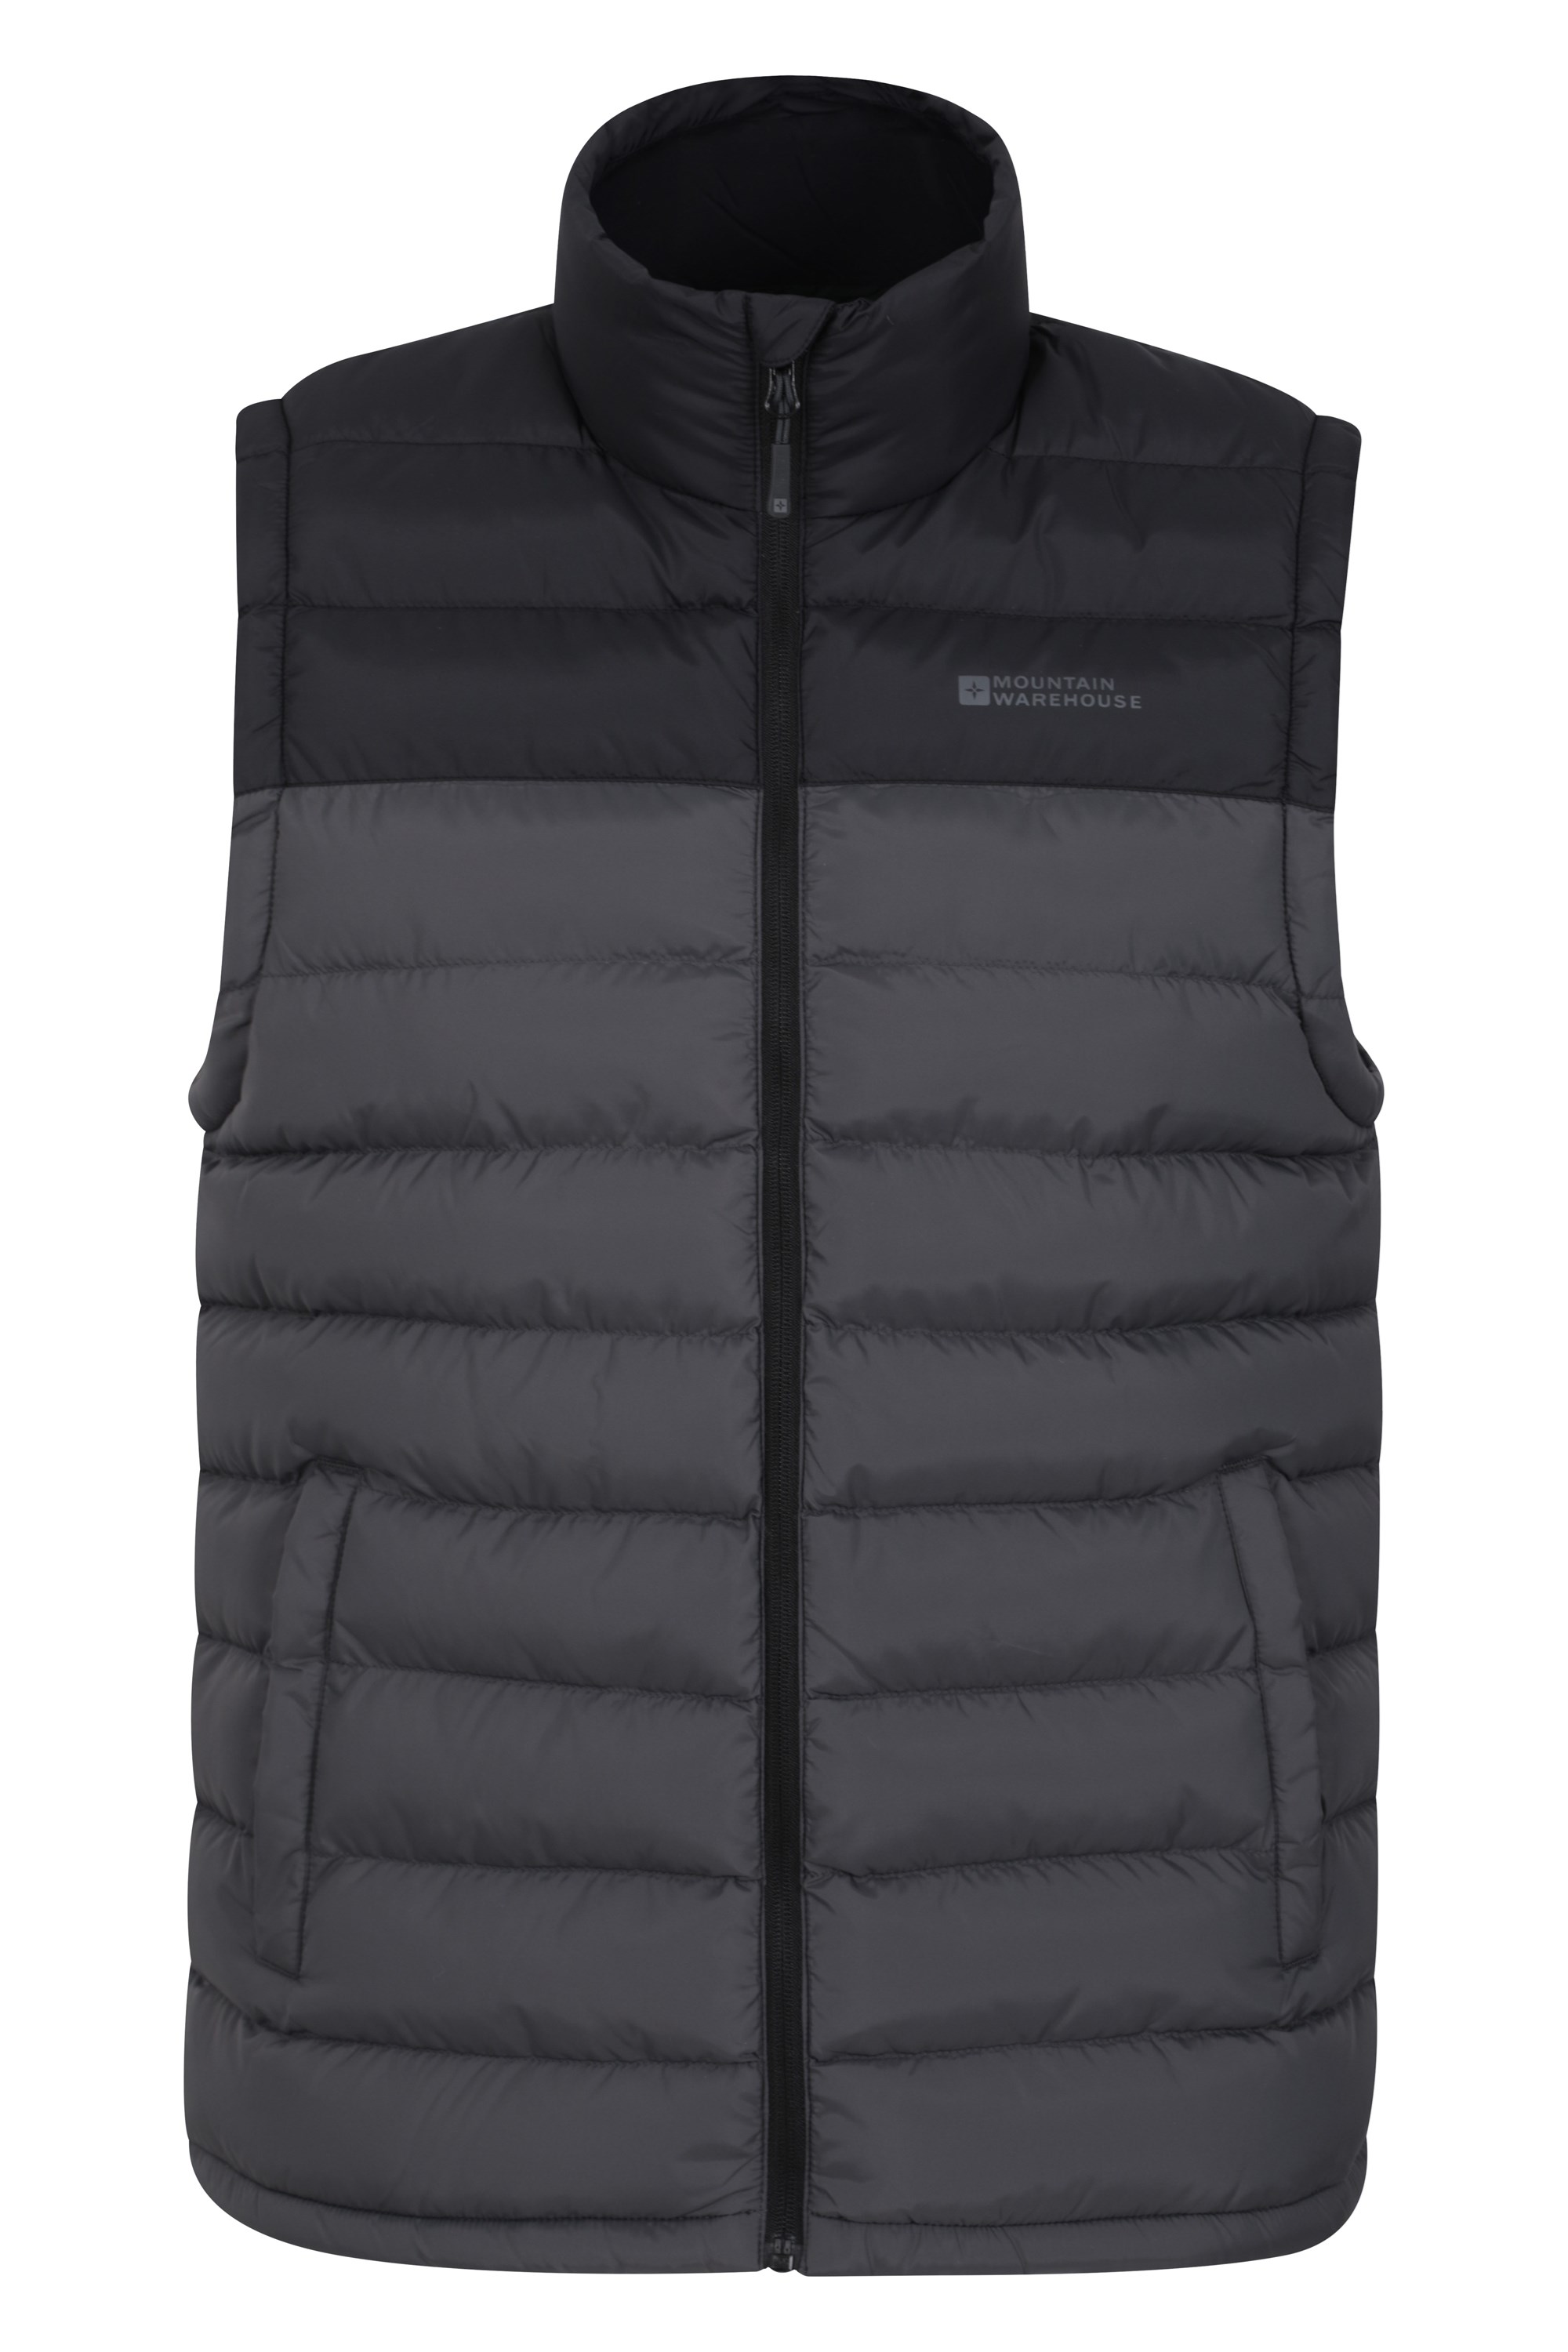 Men's Clothing Gilets Clothing for Winter Travelling Mountain Warehouse ...